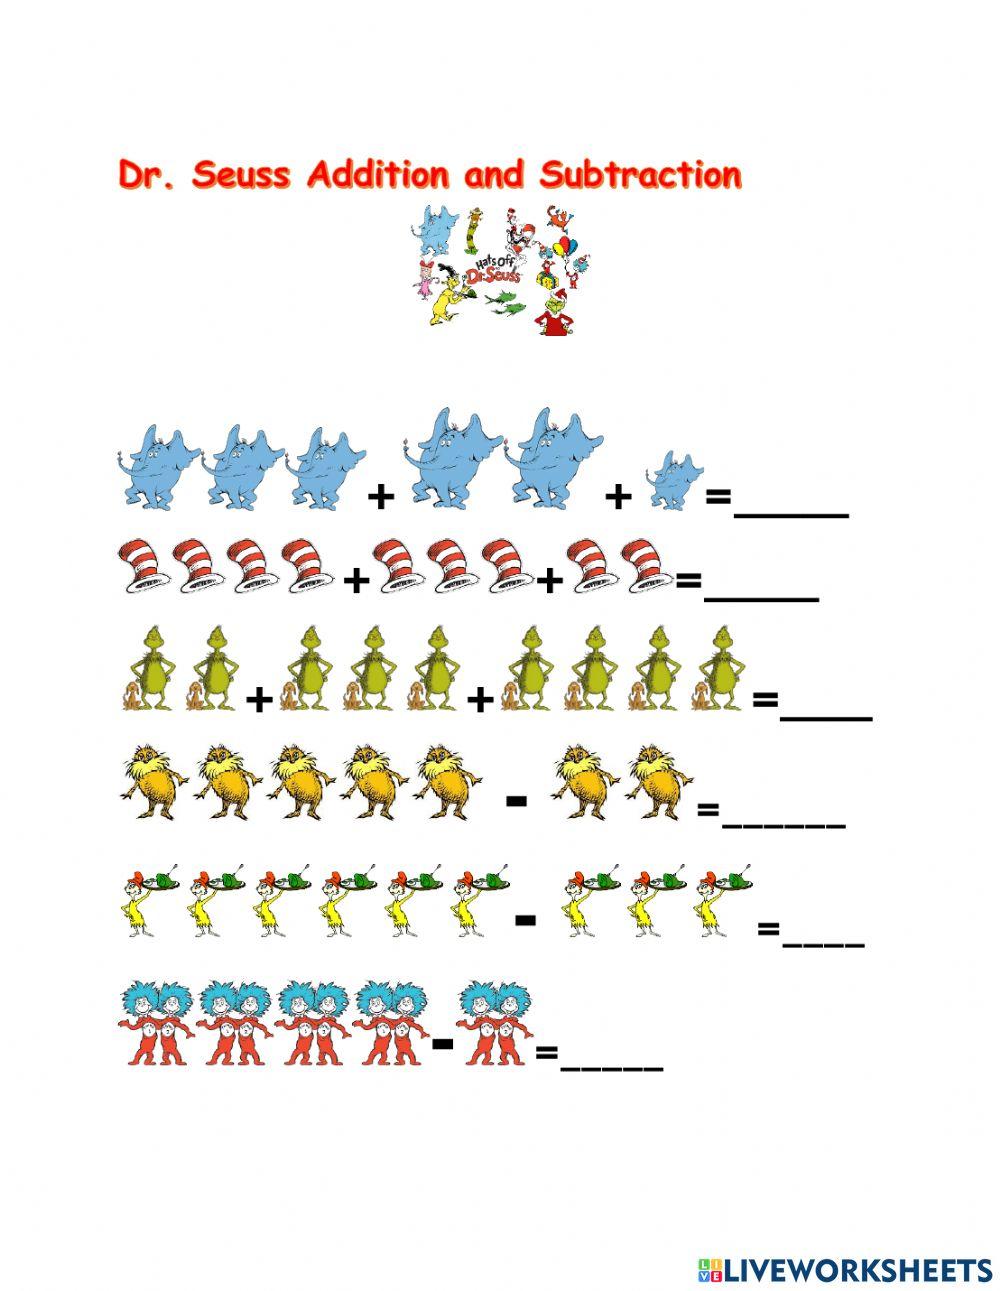 Dr. Seuss addition and subtraction